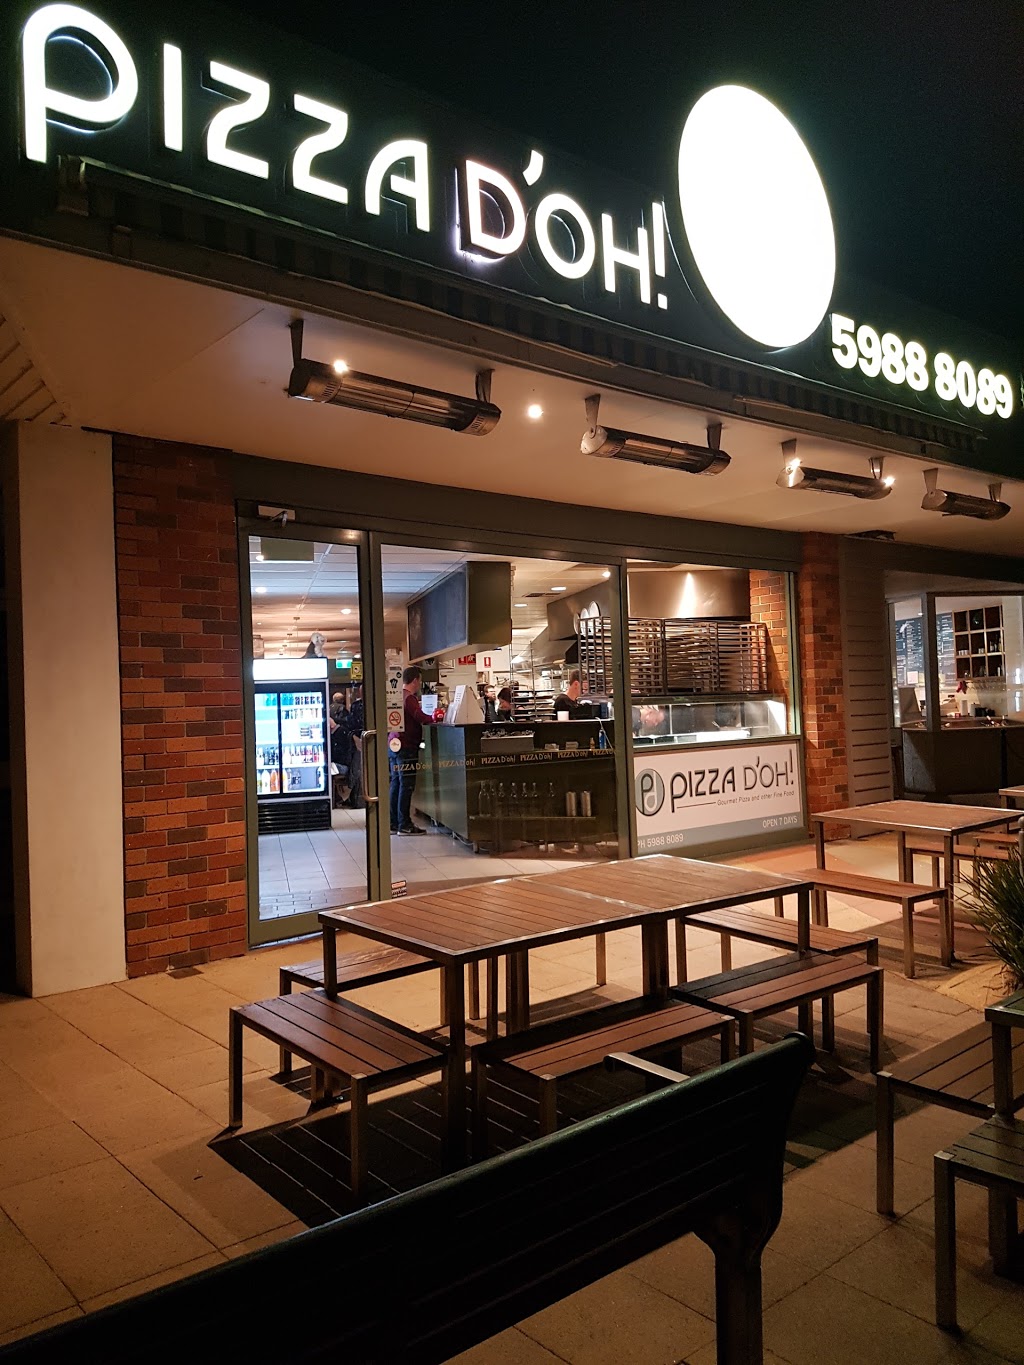 Pizza Doh | 2845 Point Nepean Rd, Blairgowrie VIC 3942, Australia | Phone: (03) 5988 8089